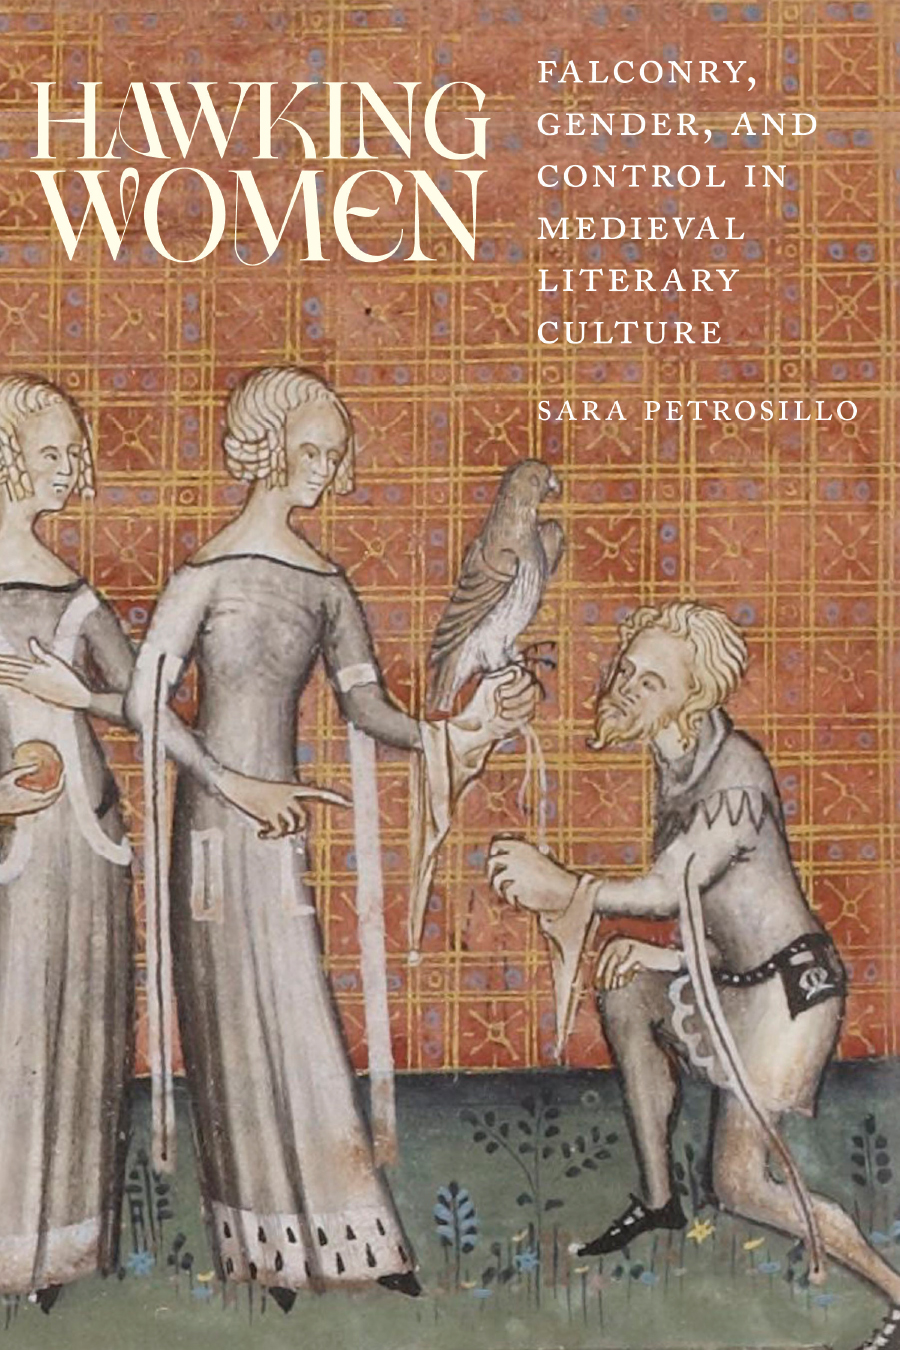 Front cover of Hawking Women: Falconry, Gender, and Control in Medieval Literary Culture by Sara Petrosillo, featuring a medieval portrait of a man kneeling in front of two women, one of whom is holding a hawk on her wrist.